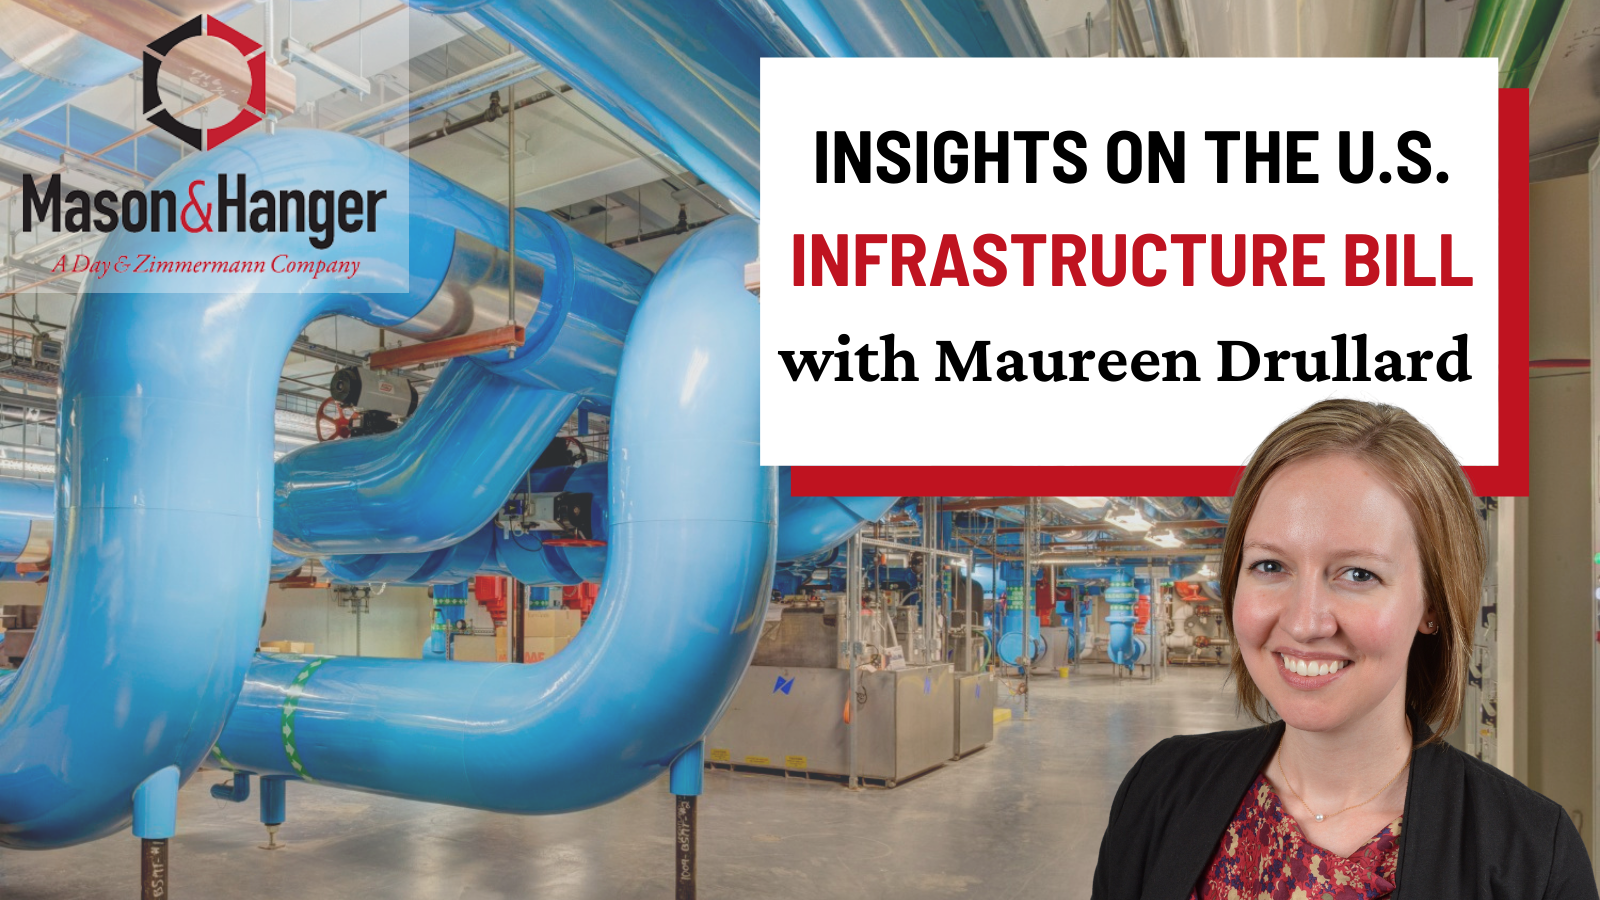 Insights on the U.S. Infrastructure Bill - Water Systems & Usage